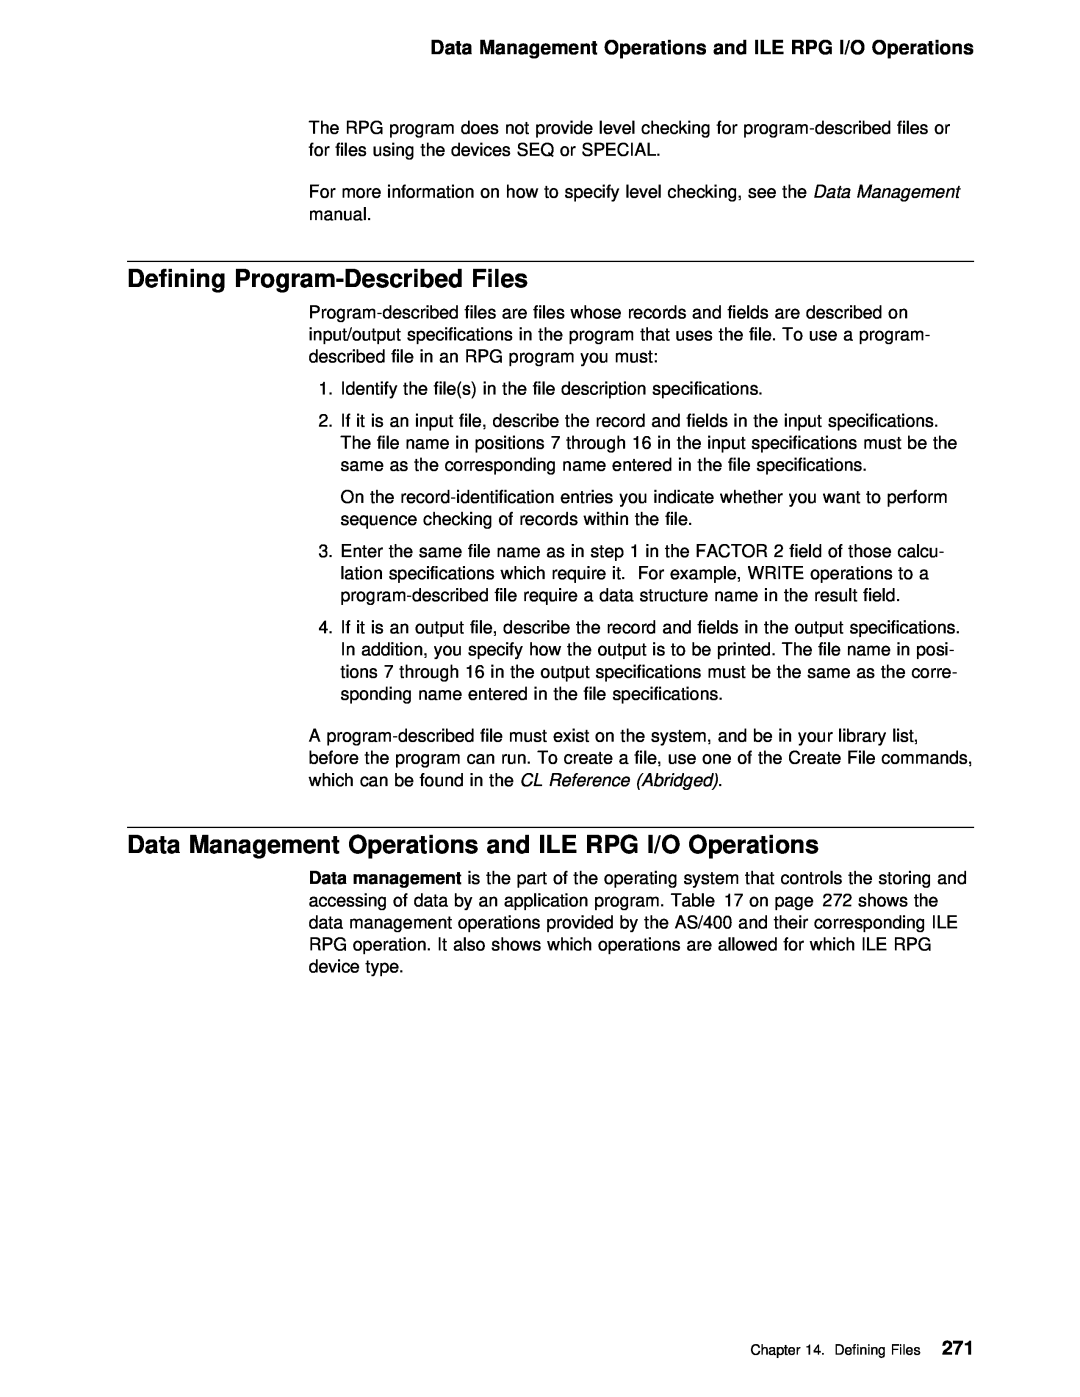 IBM AS/400 manual Defining Program-Described Files, Data Management Operations and ILE RPG I/O Operations 